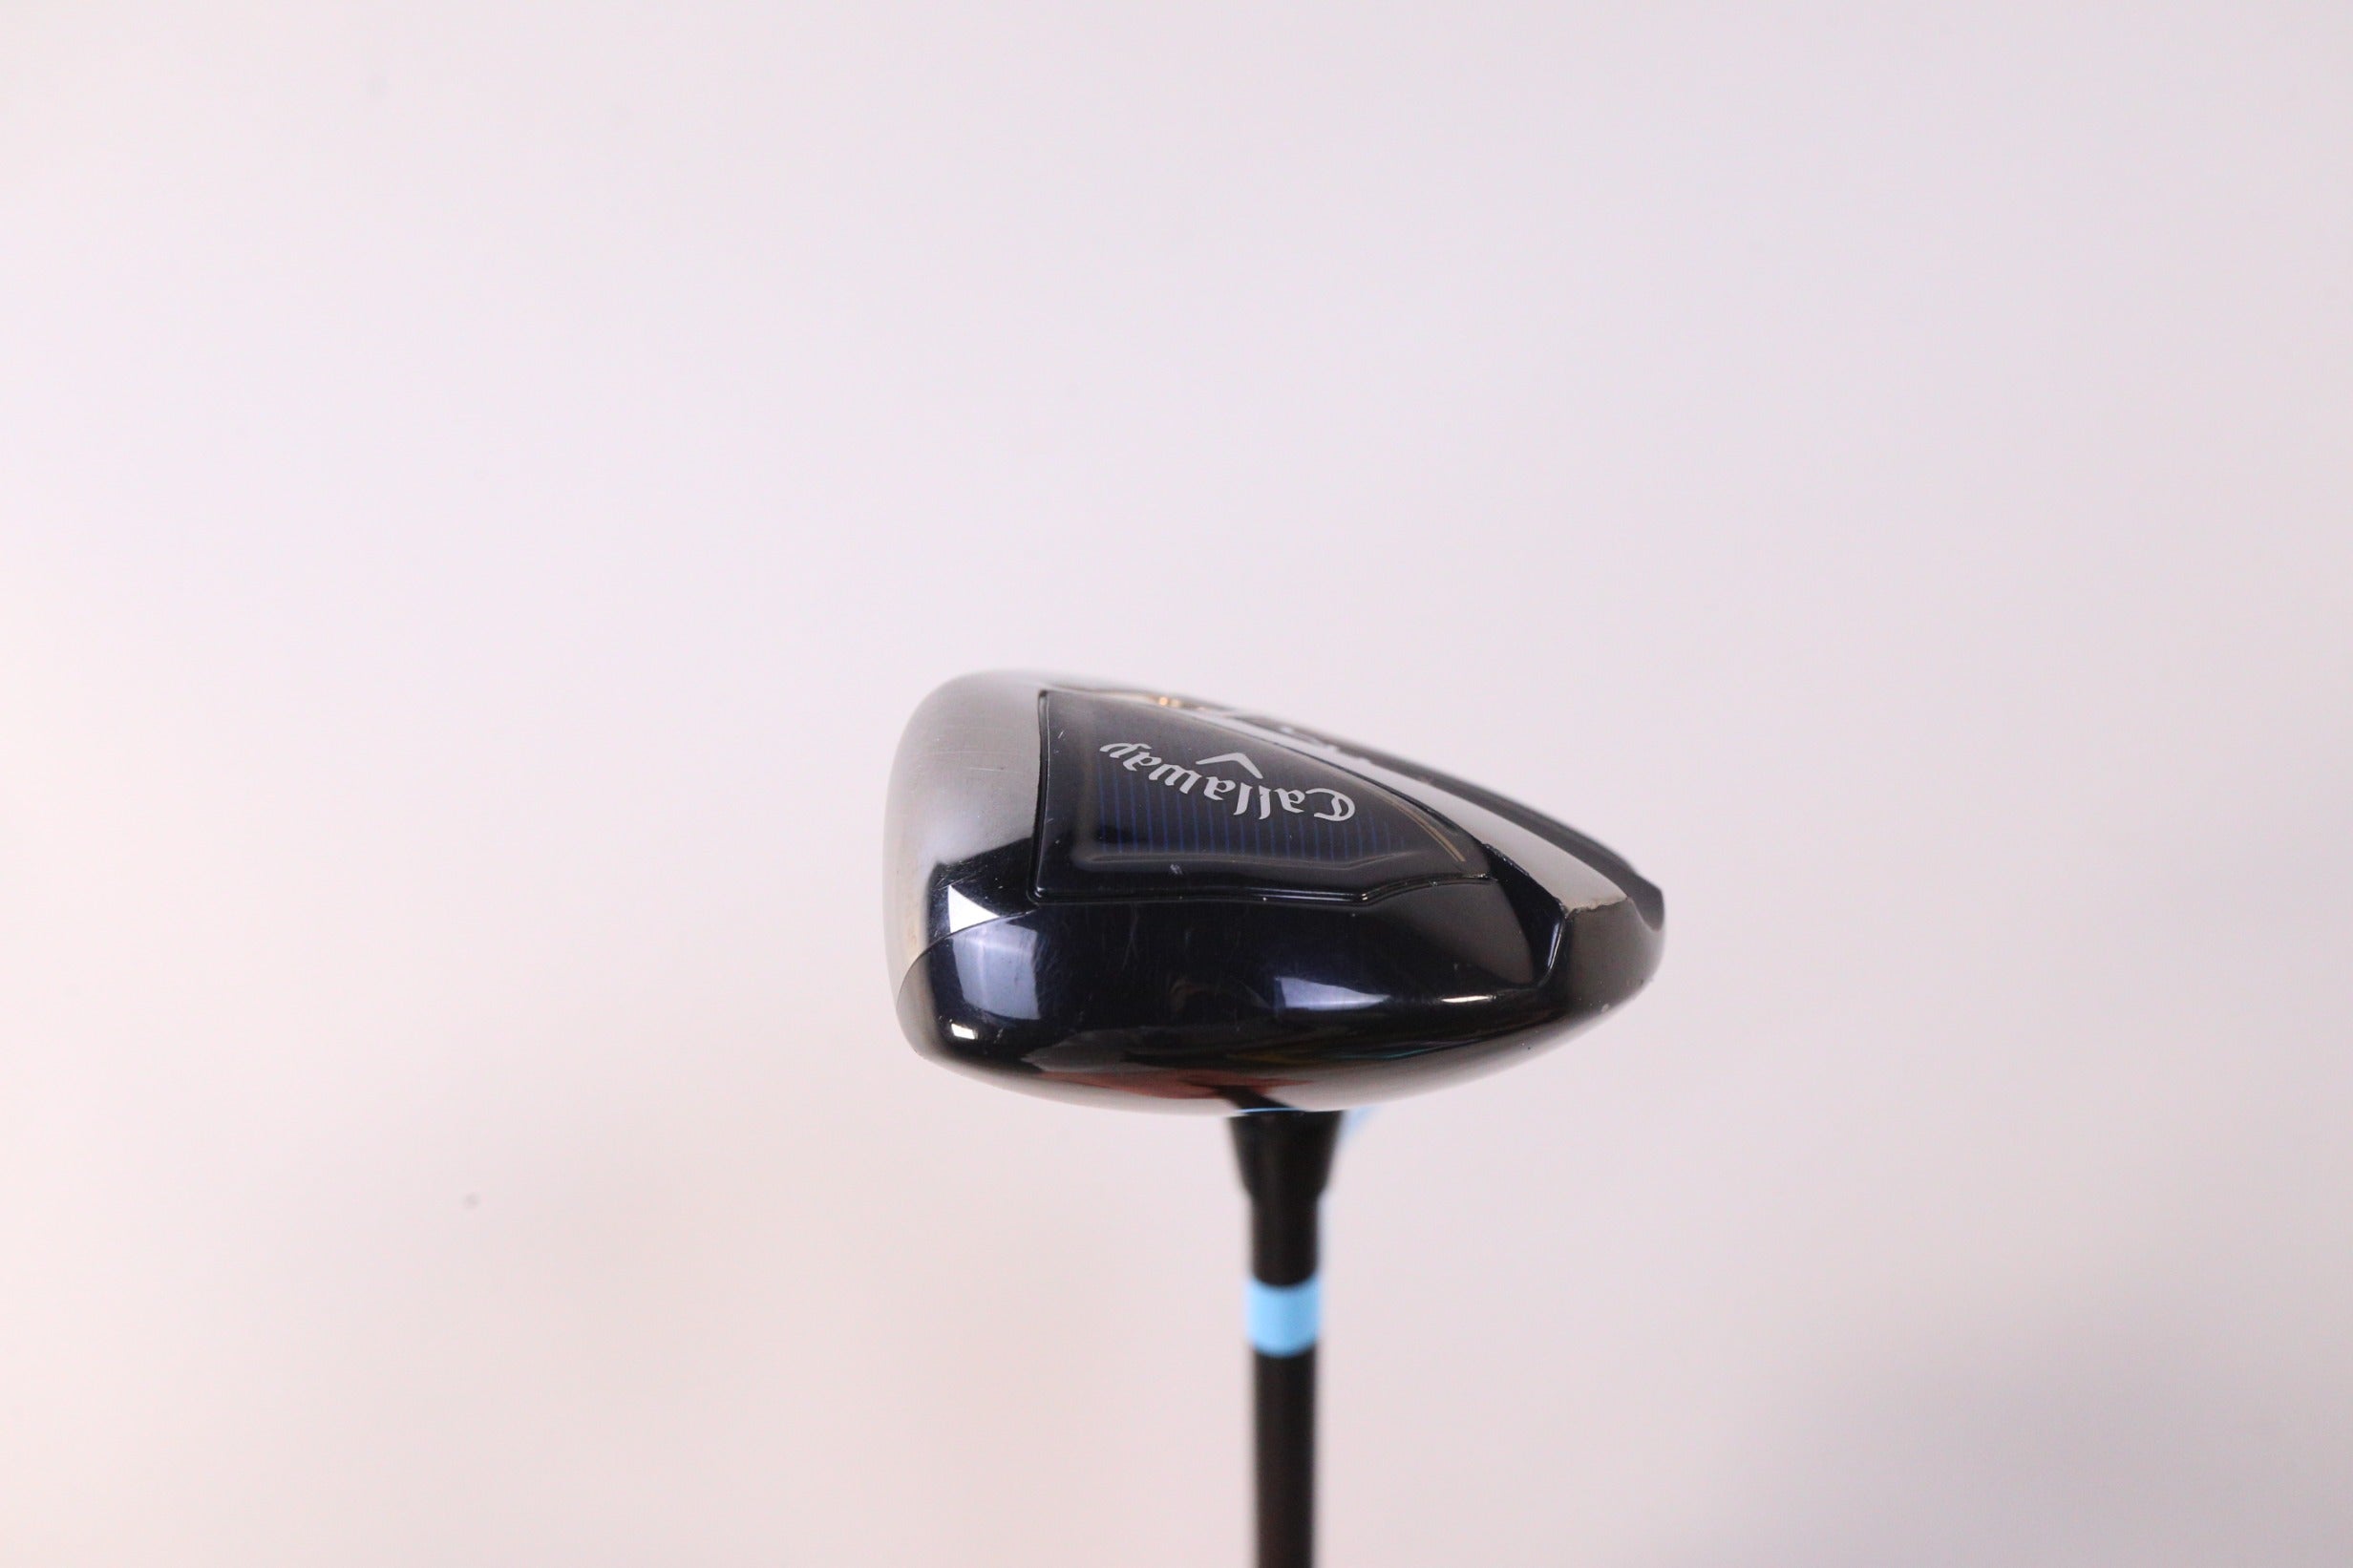 Used Callaway Paradym Right-Handed Hybrid – Next Round